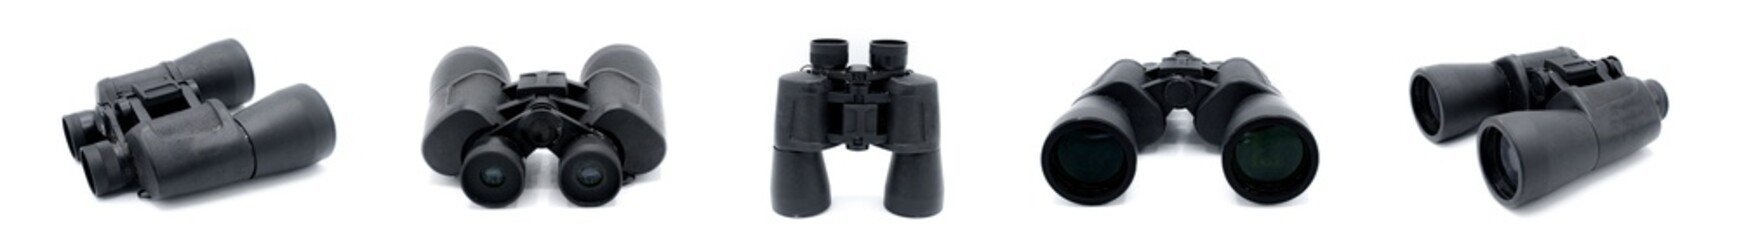 A pair of black rubber grip metal binoculars isolated on white background.  Well worn, used, dirty...